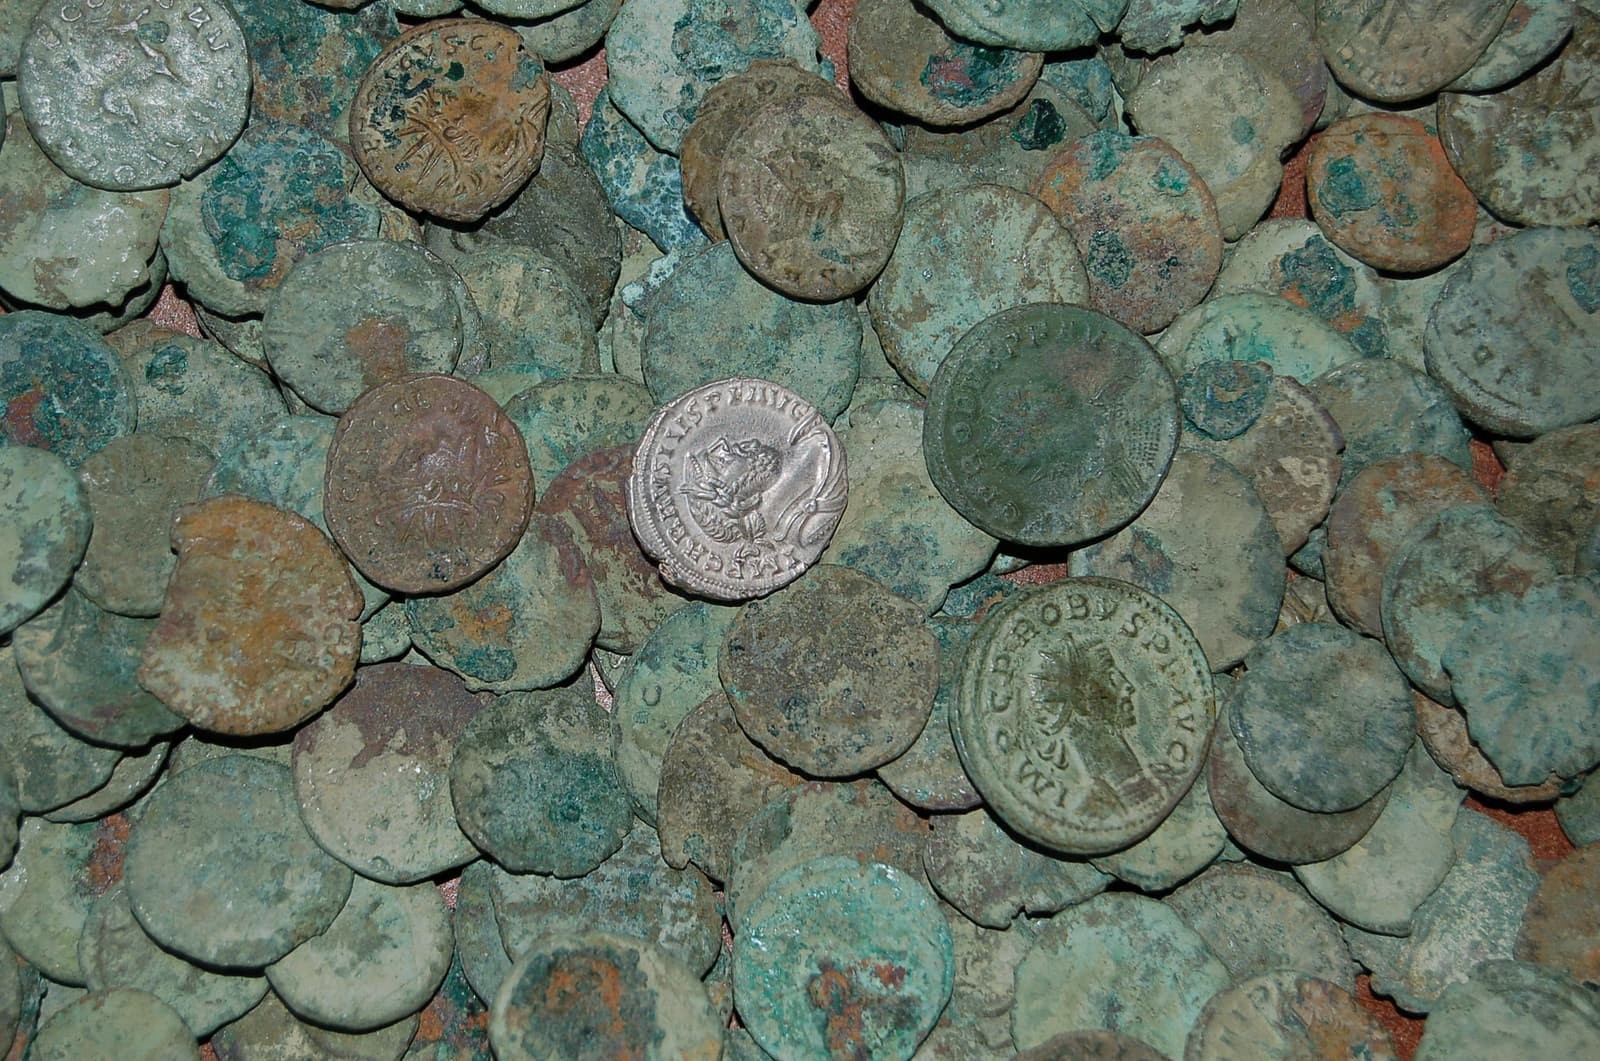 Coins from the Frome Hoard